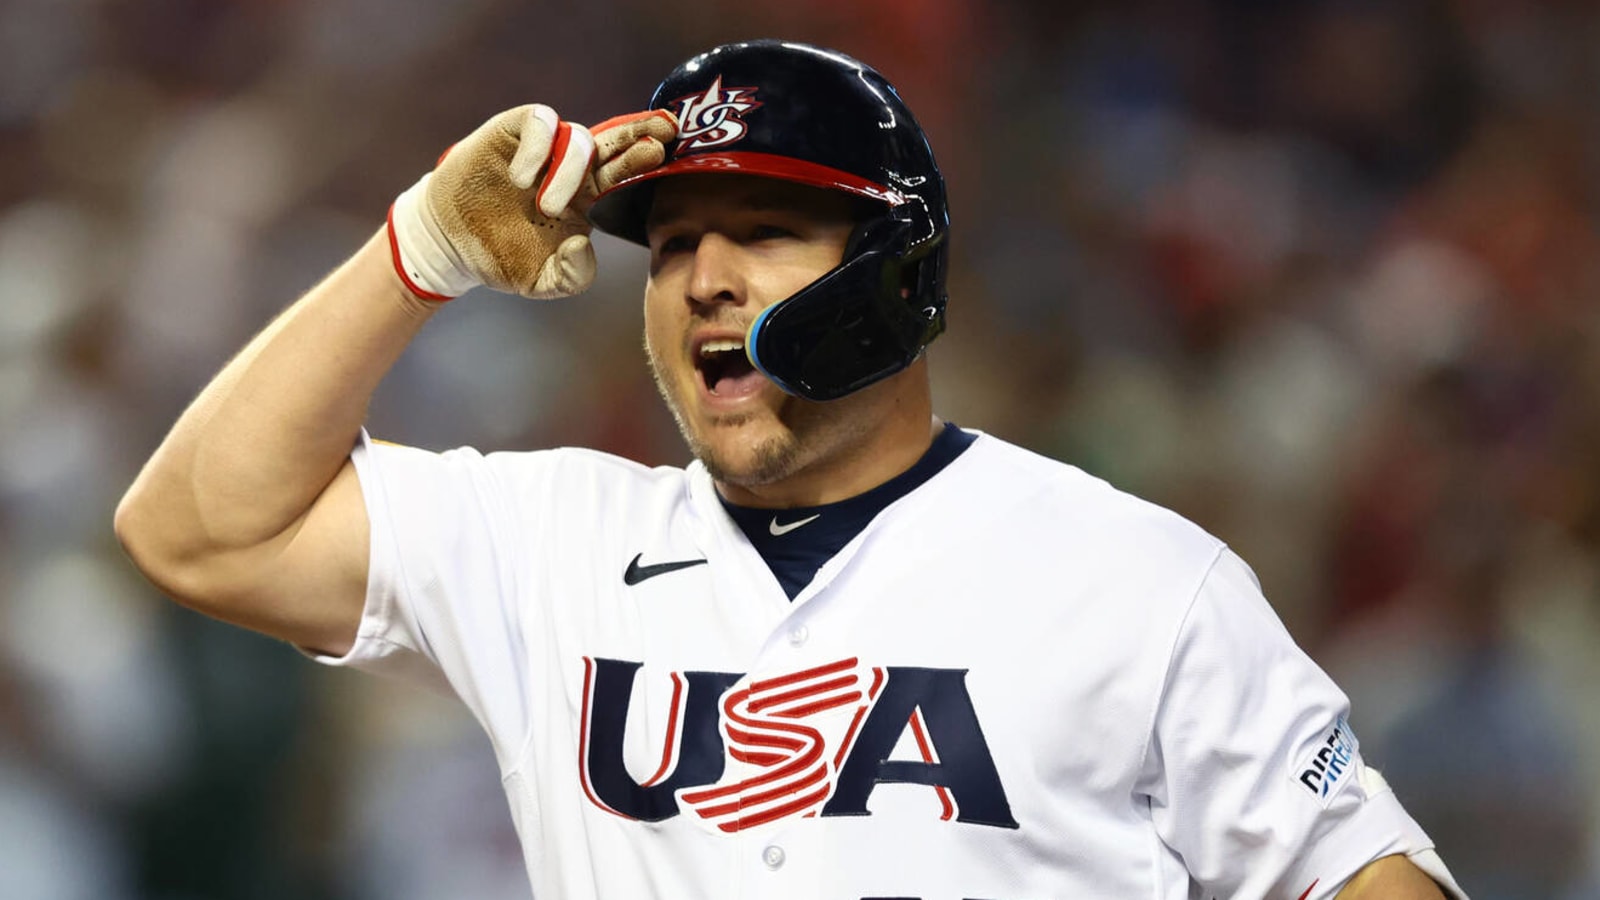 WBC may have provided the spark Mike Trout needed